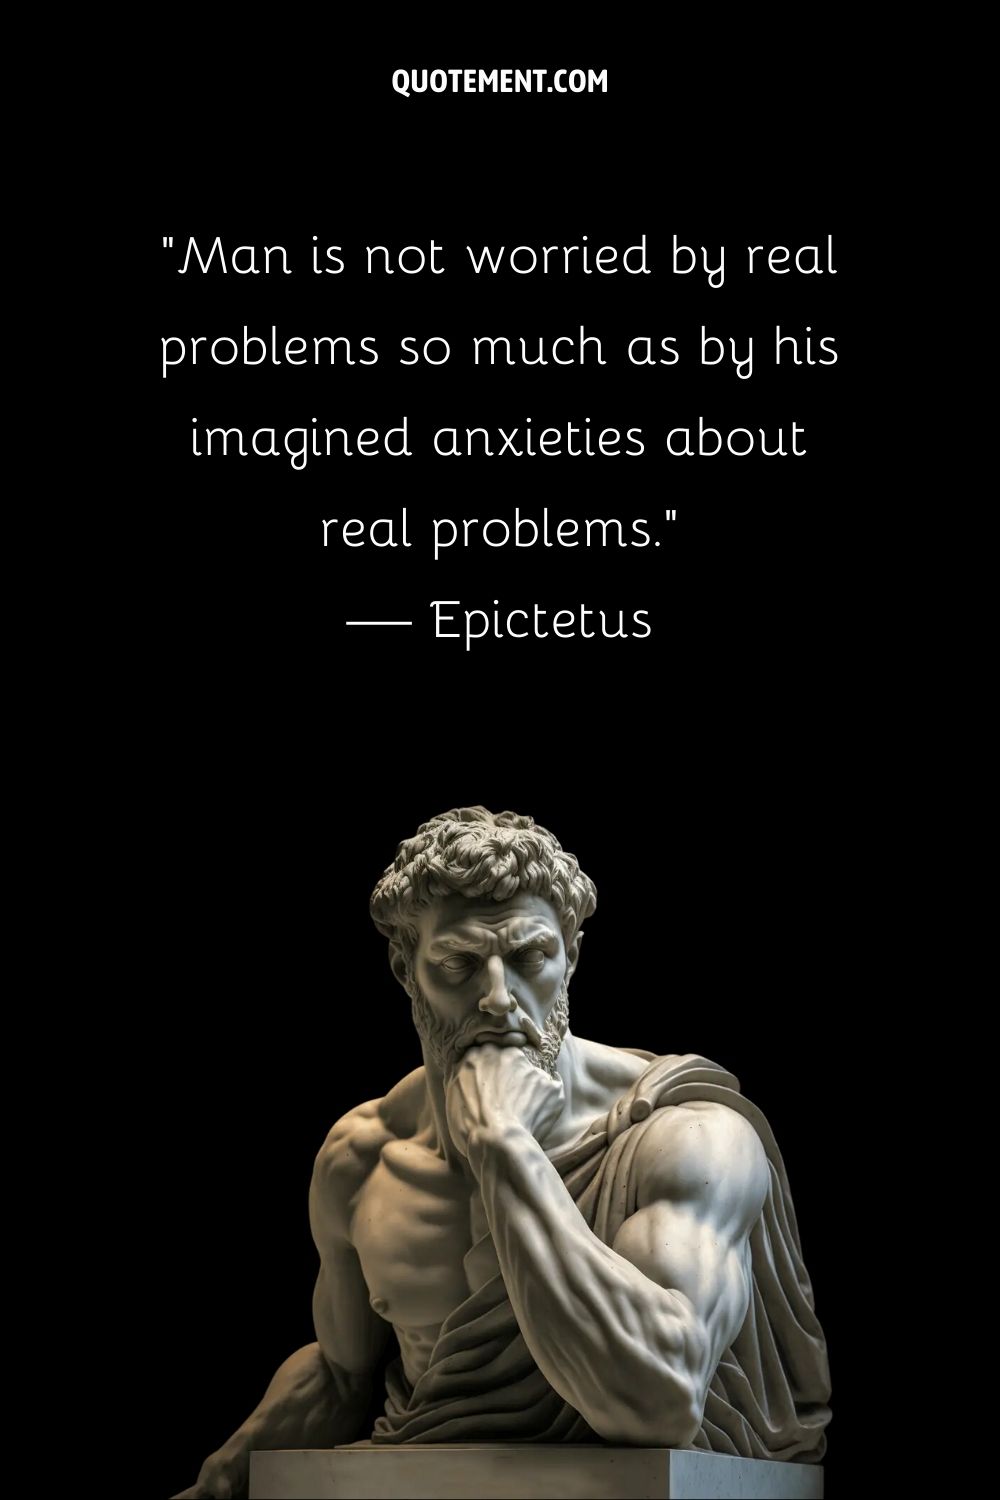 In the quiet of marble, Epictetus contemplates timeless wisdom.